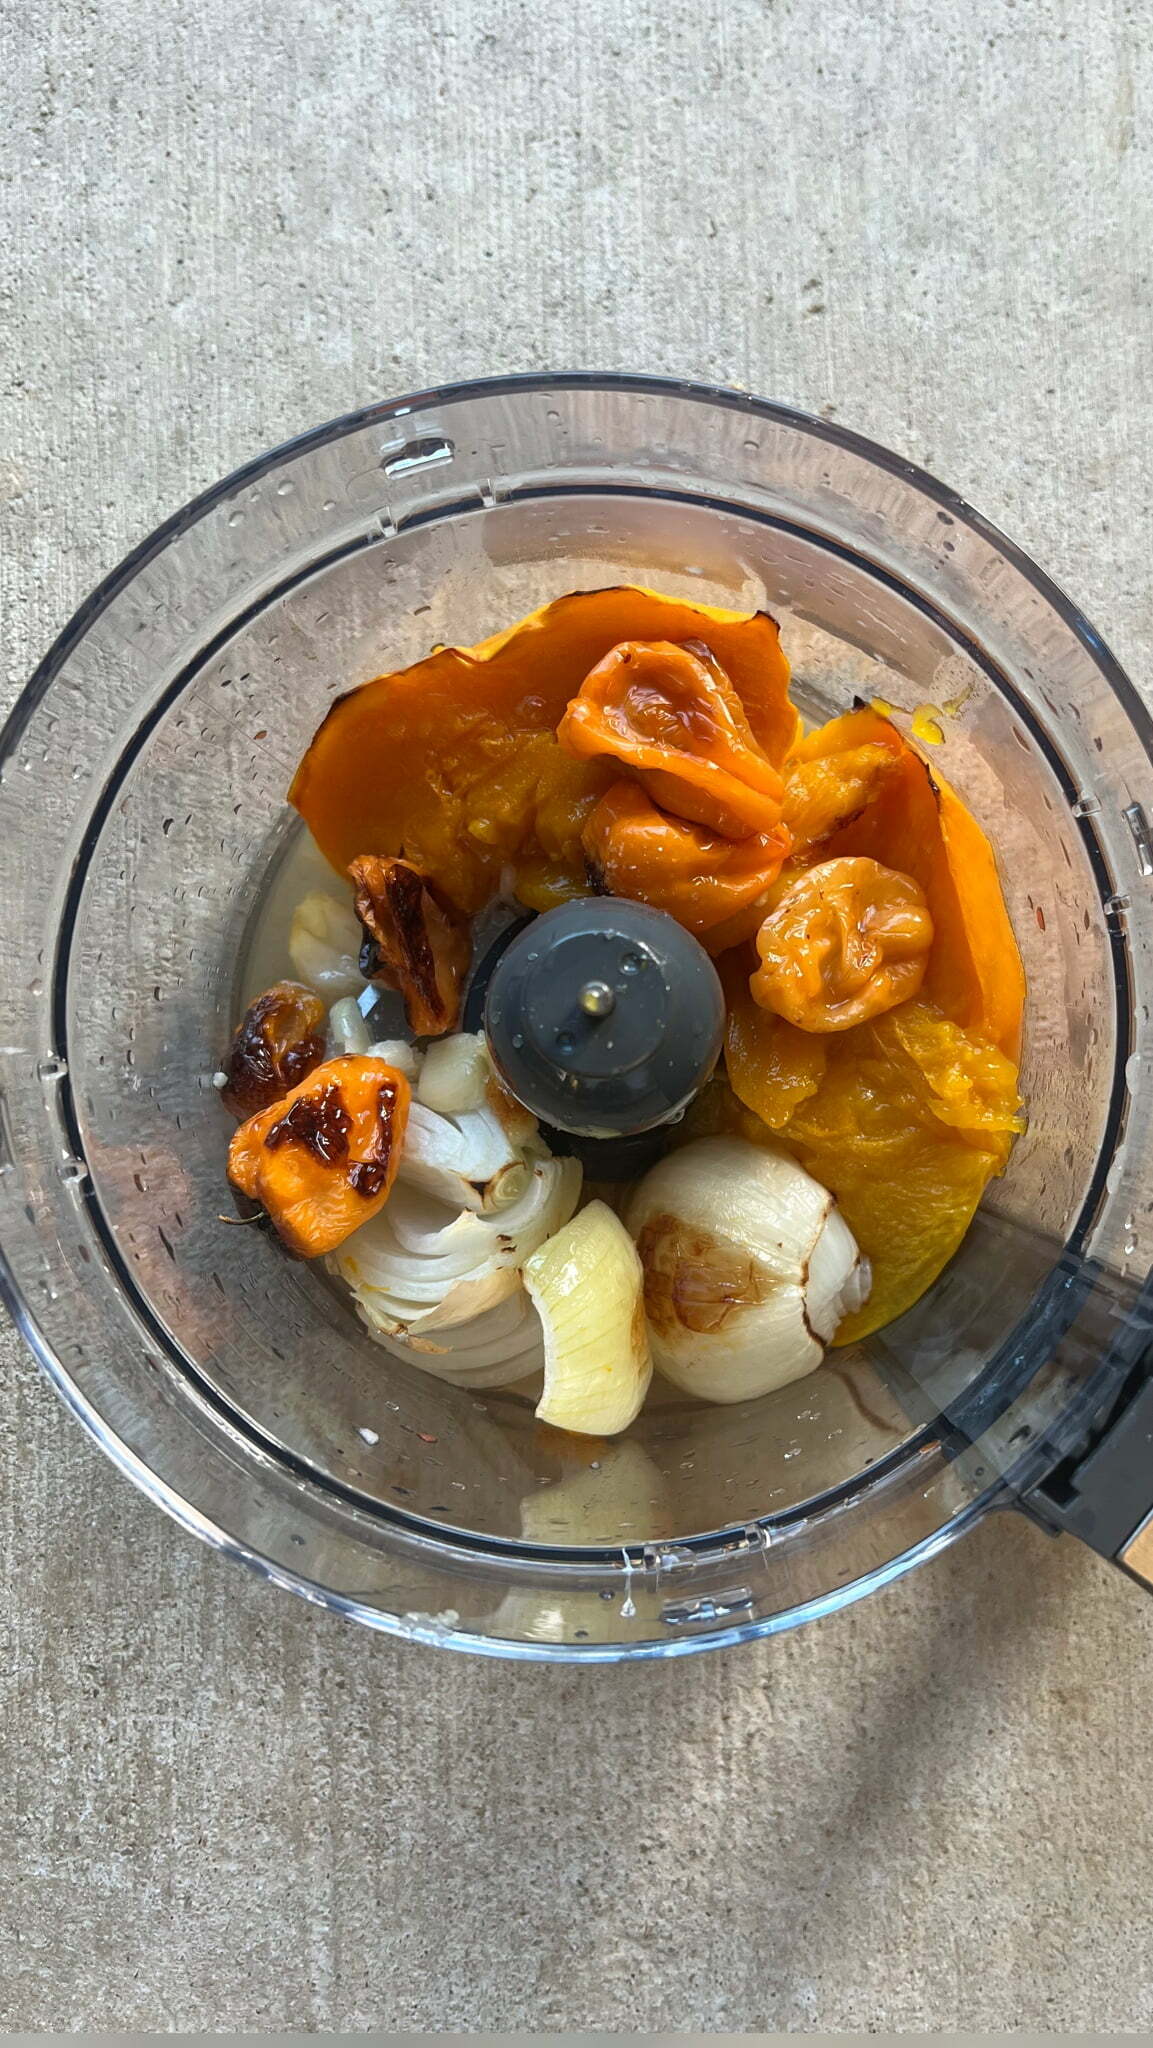 mangos, habaneros, onion and garlic roasted to perfection in the bowl of the fodd processor.